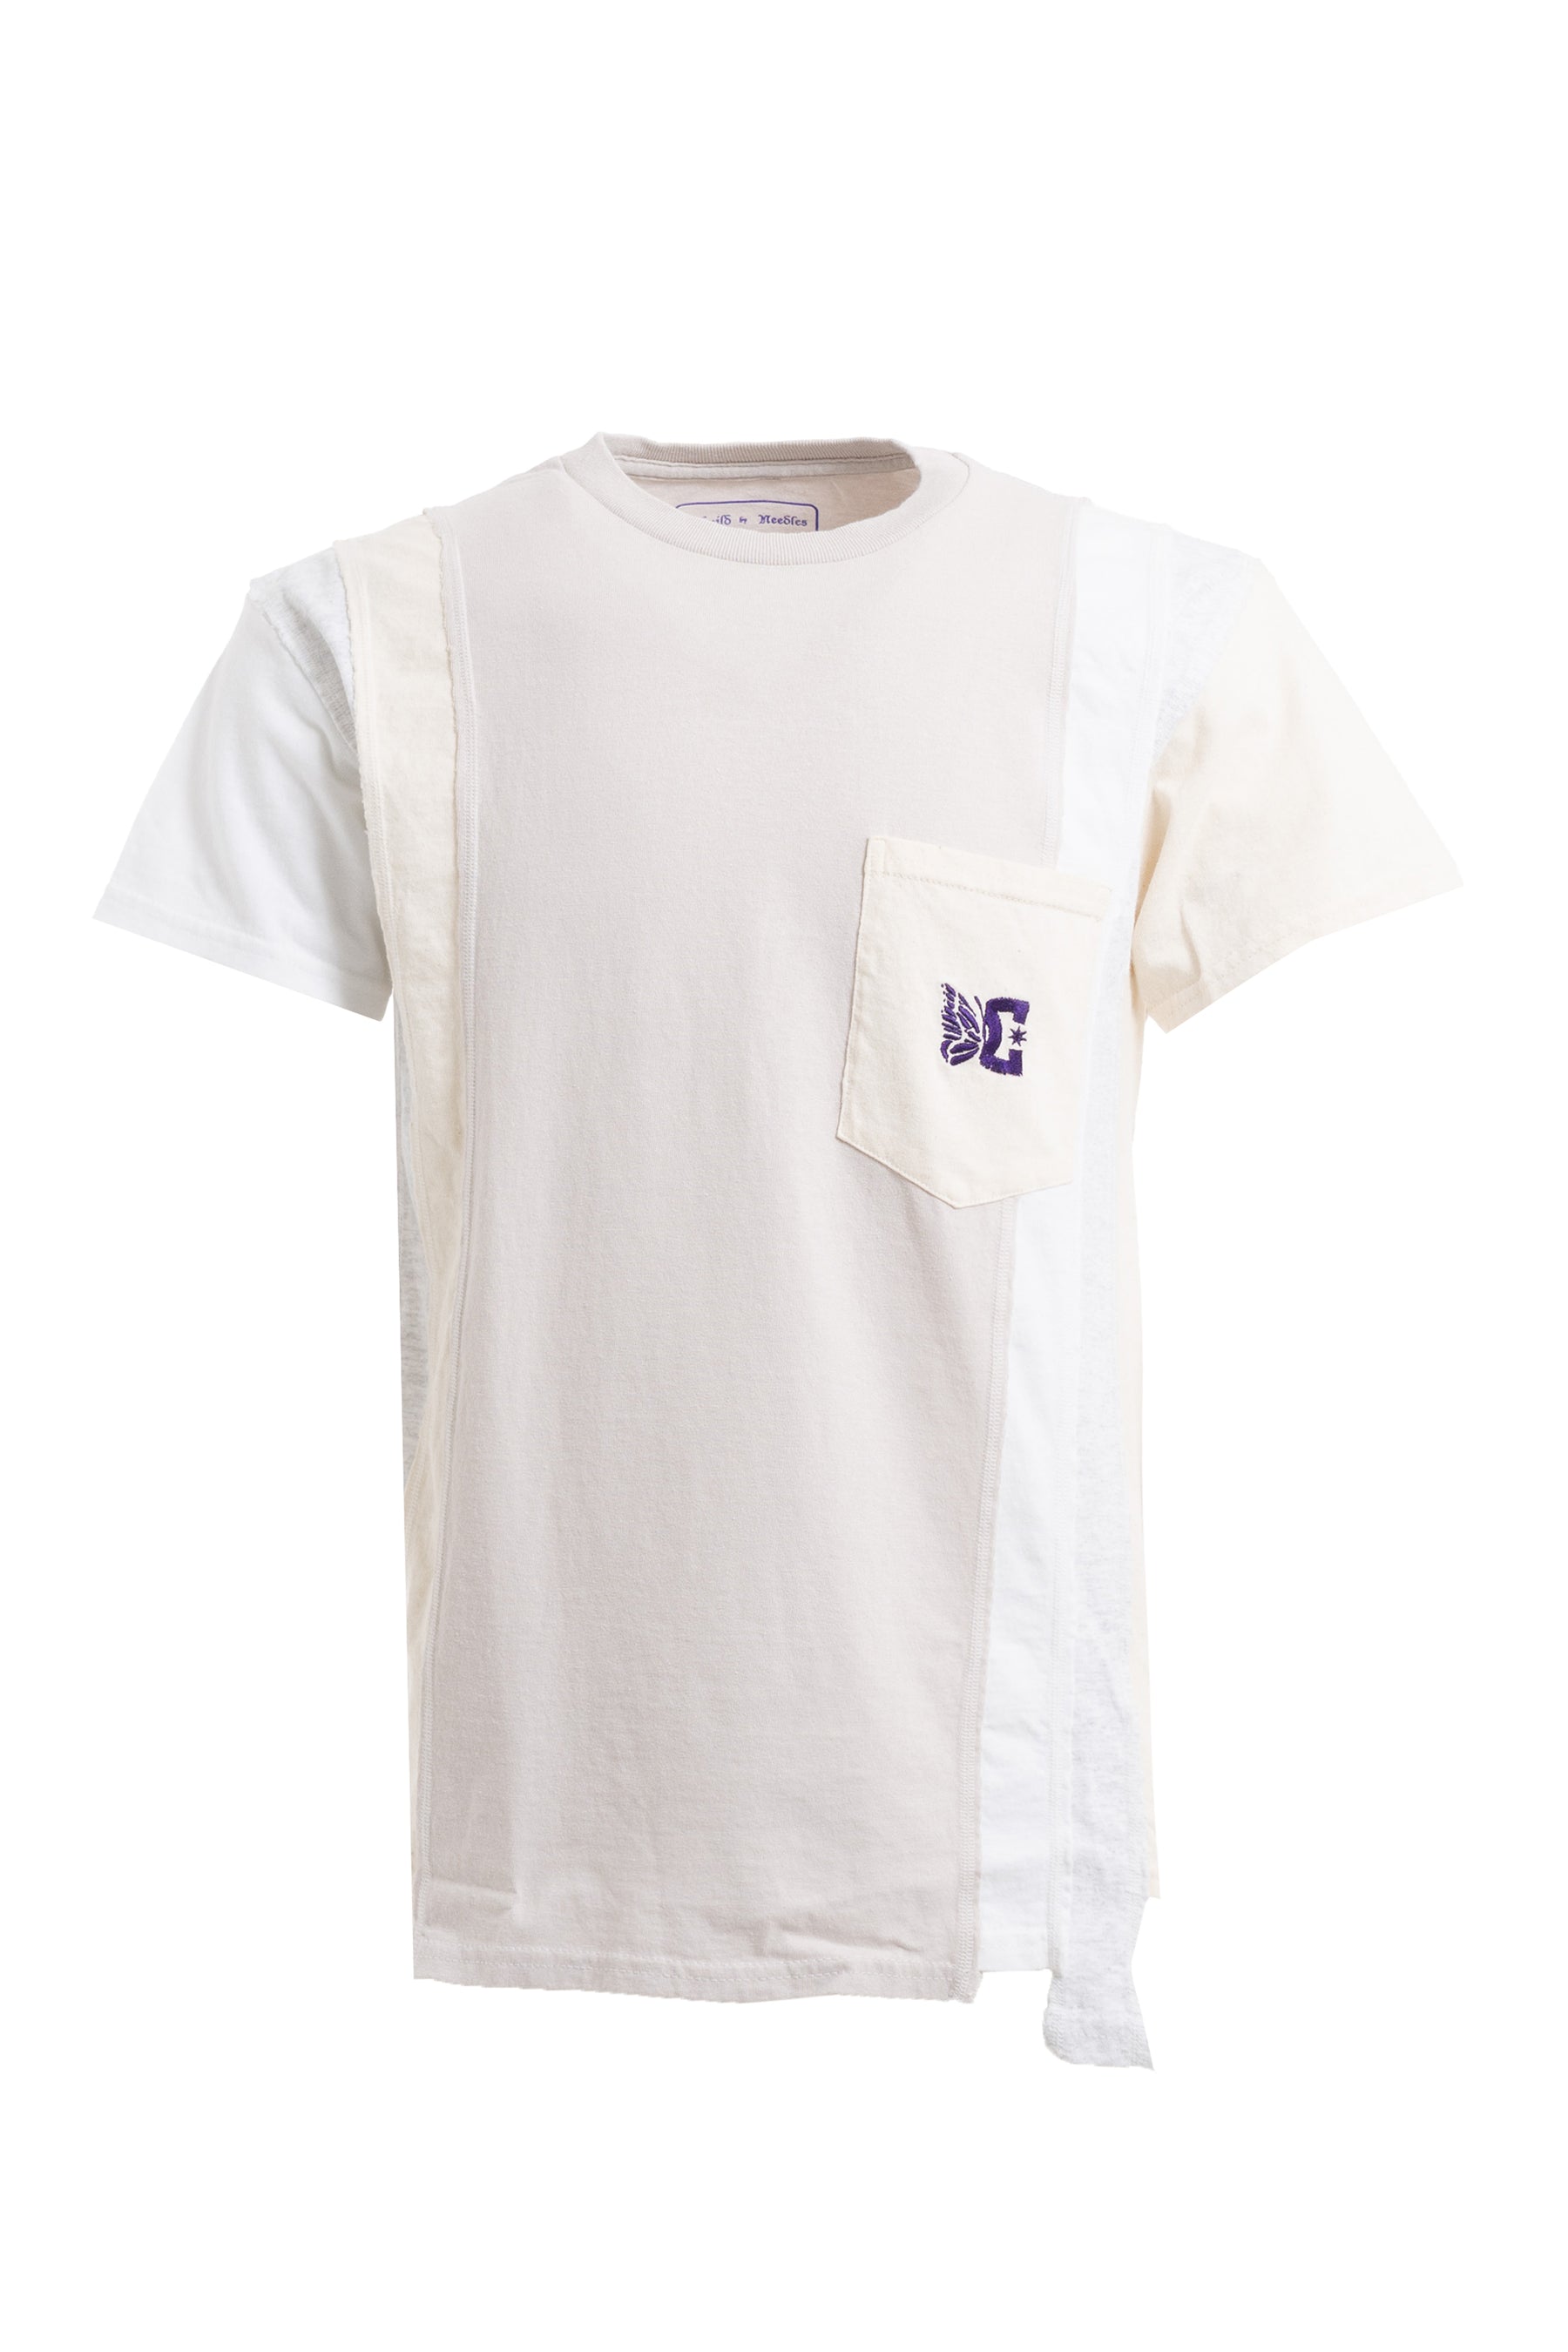 7 CUTS S/S TEE - SOLID / FADE / IVORY / XS